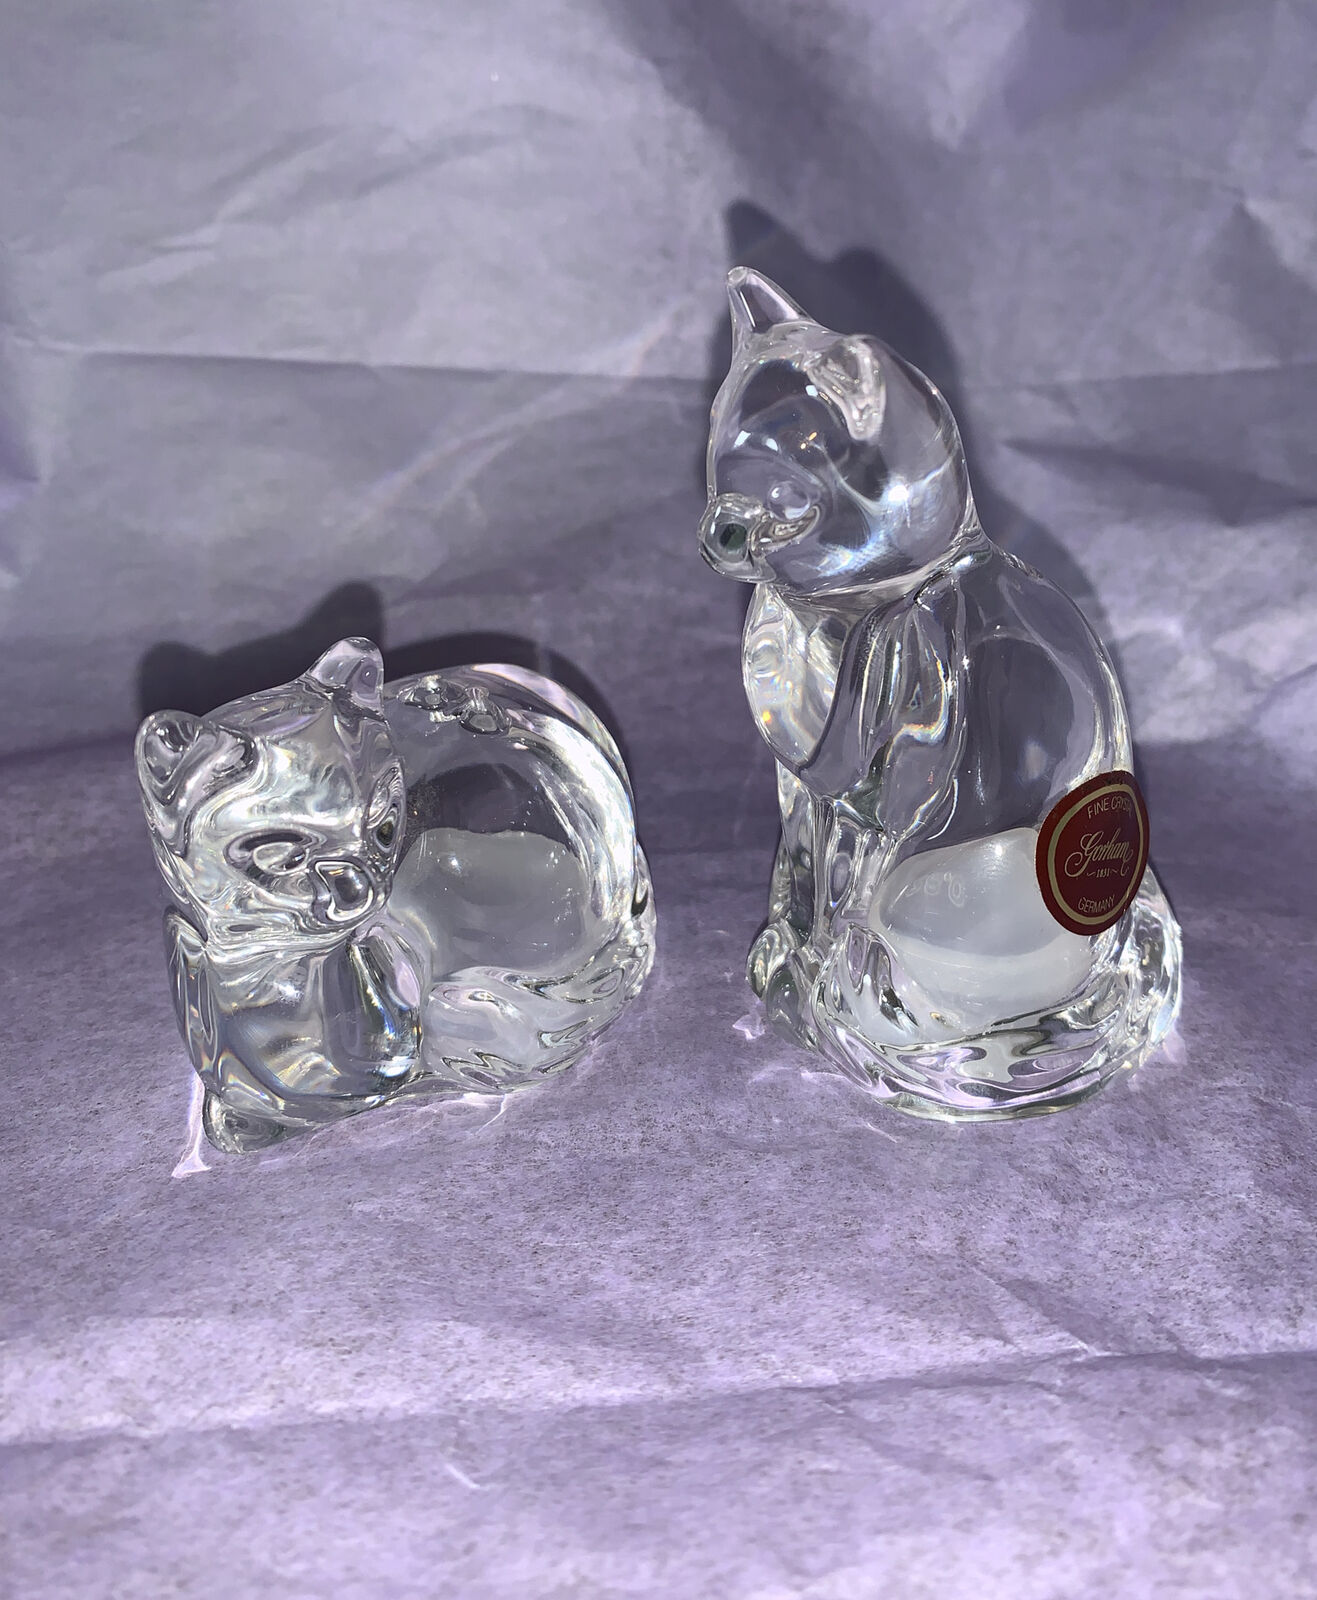 GORHAM Glass Crystal CAT SALT AND PEPPER SHAKERS SET - MADE IN GERMANY